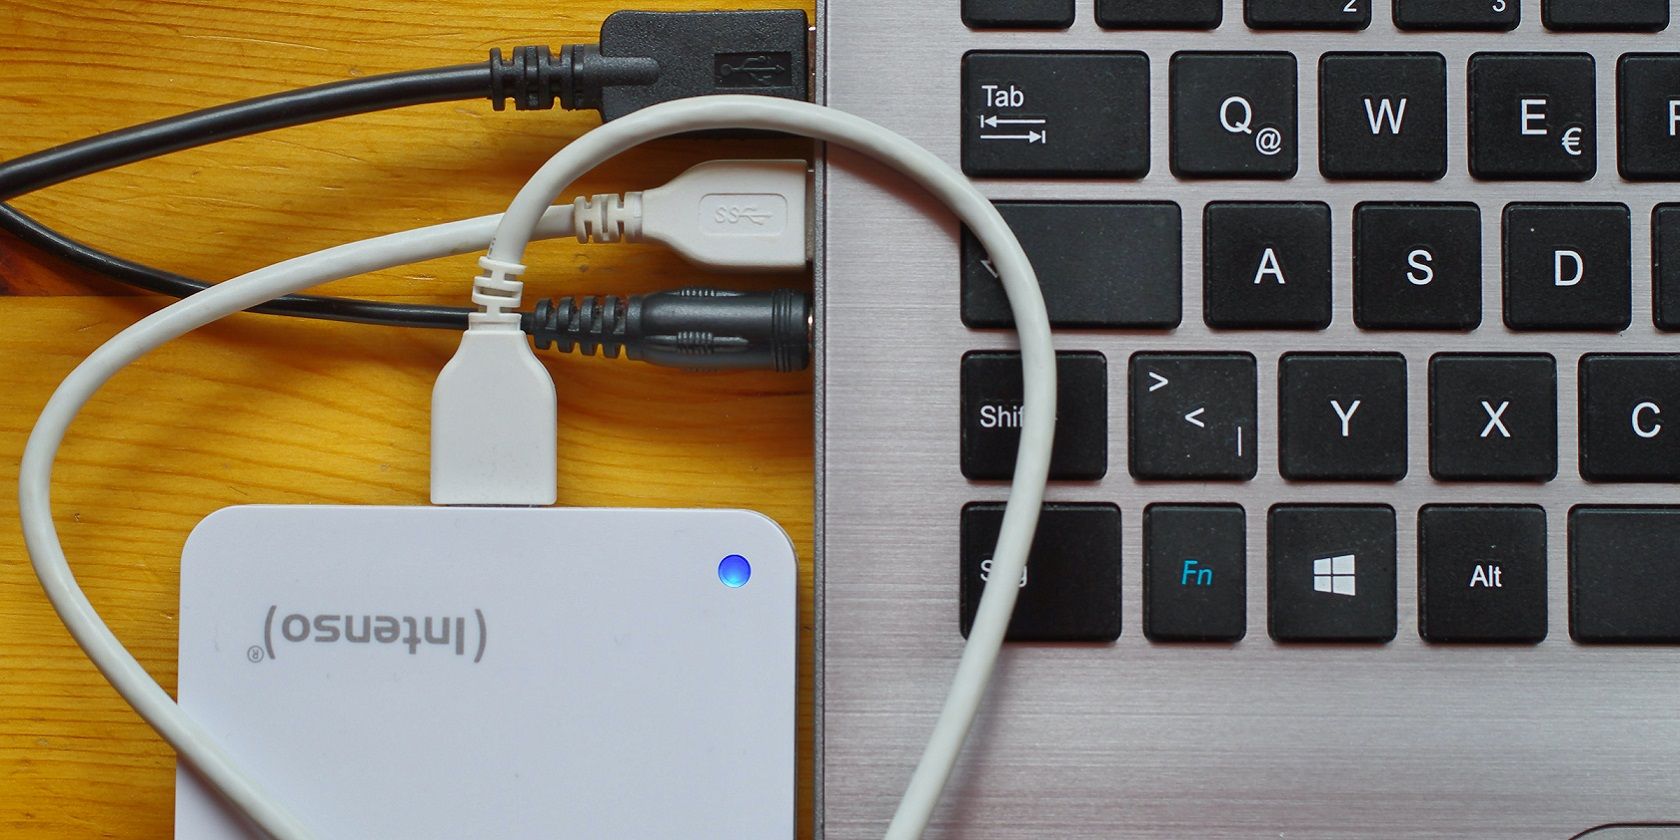 An external USB drive connected to laptop